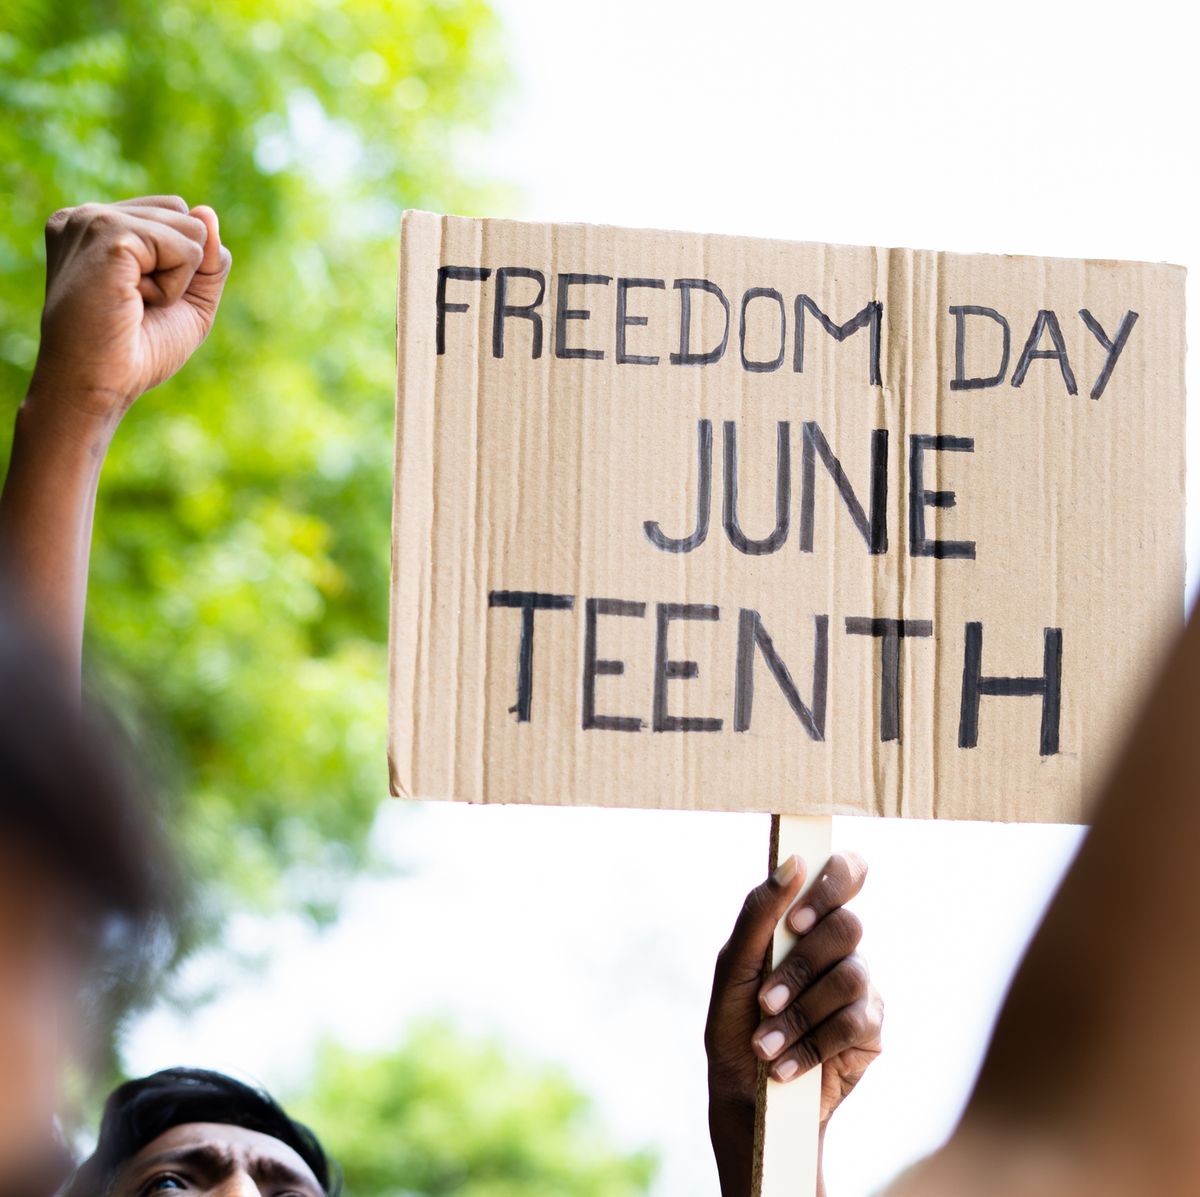 In honor of Juneteenth, who would be your ideal first Black